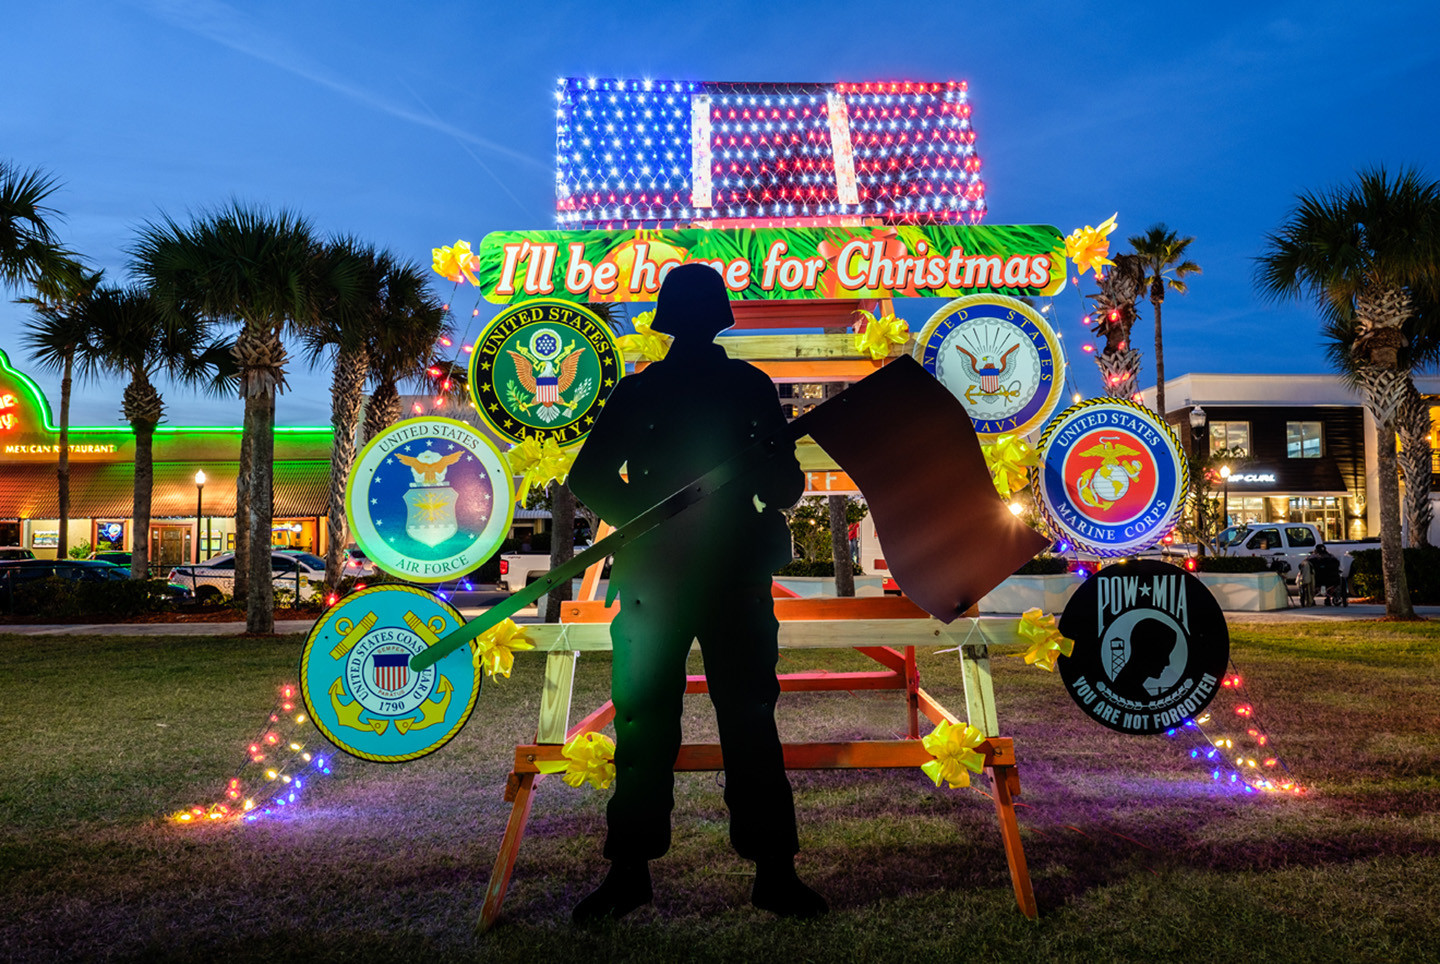 The American Legion – Post 129’s “I’ll be Home for Christmas” chair won the blue-ribbon award.